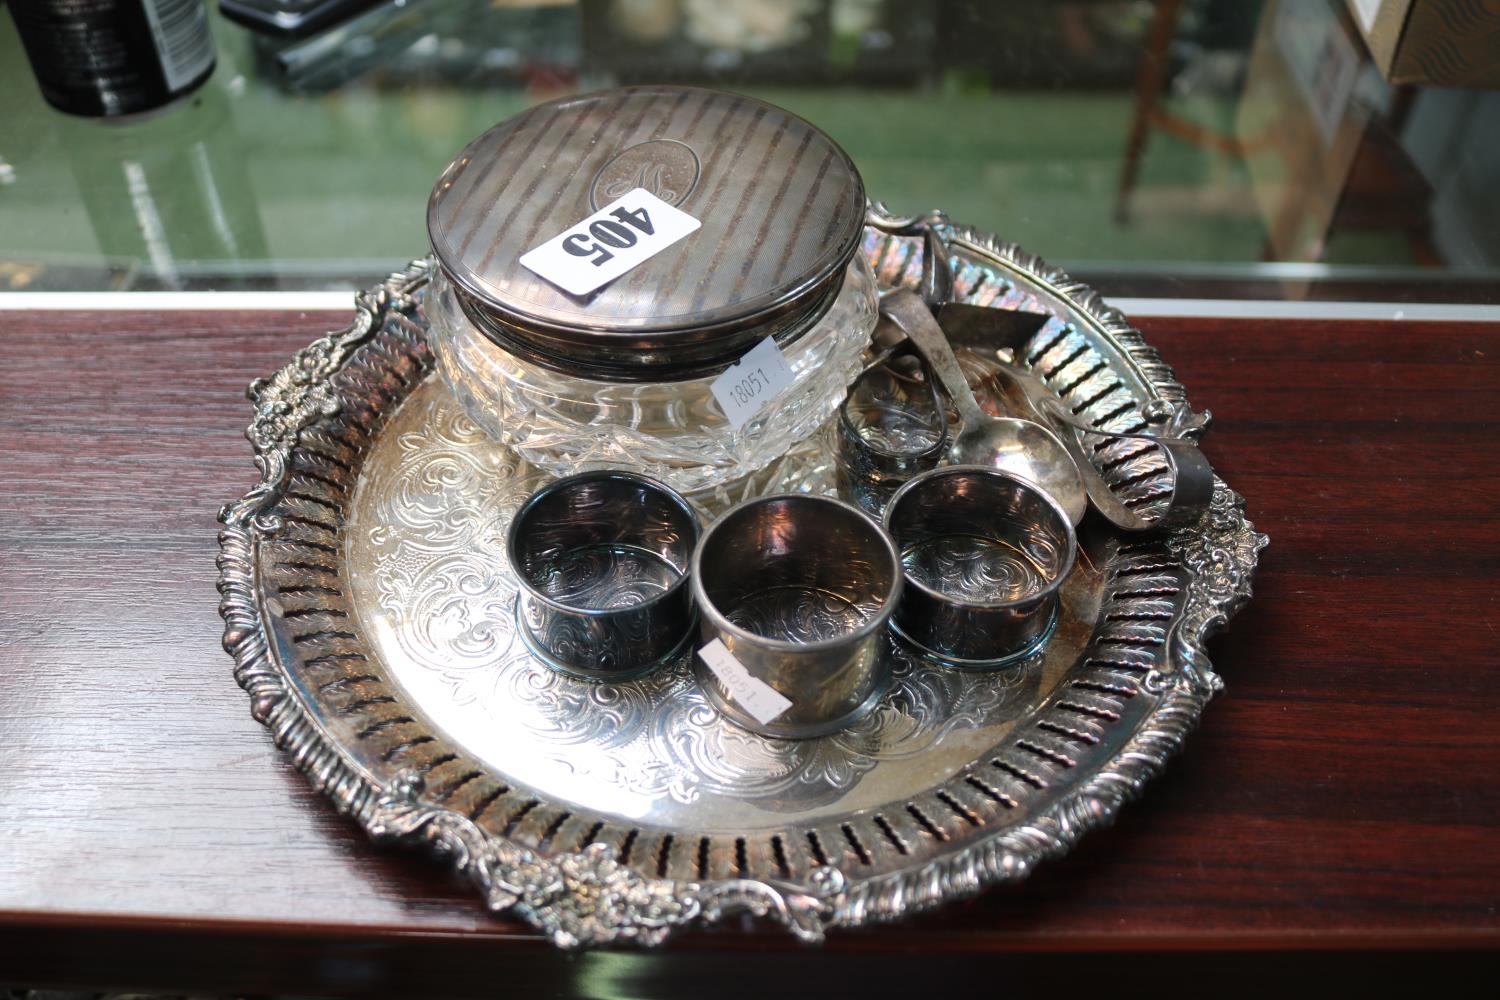 Ornate Silver plated Salver, Silver Topped Powder Jar and assorted small Silver items